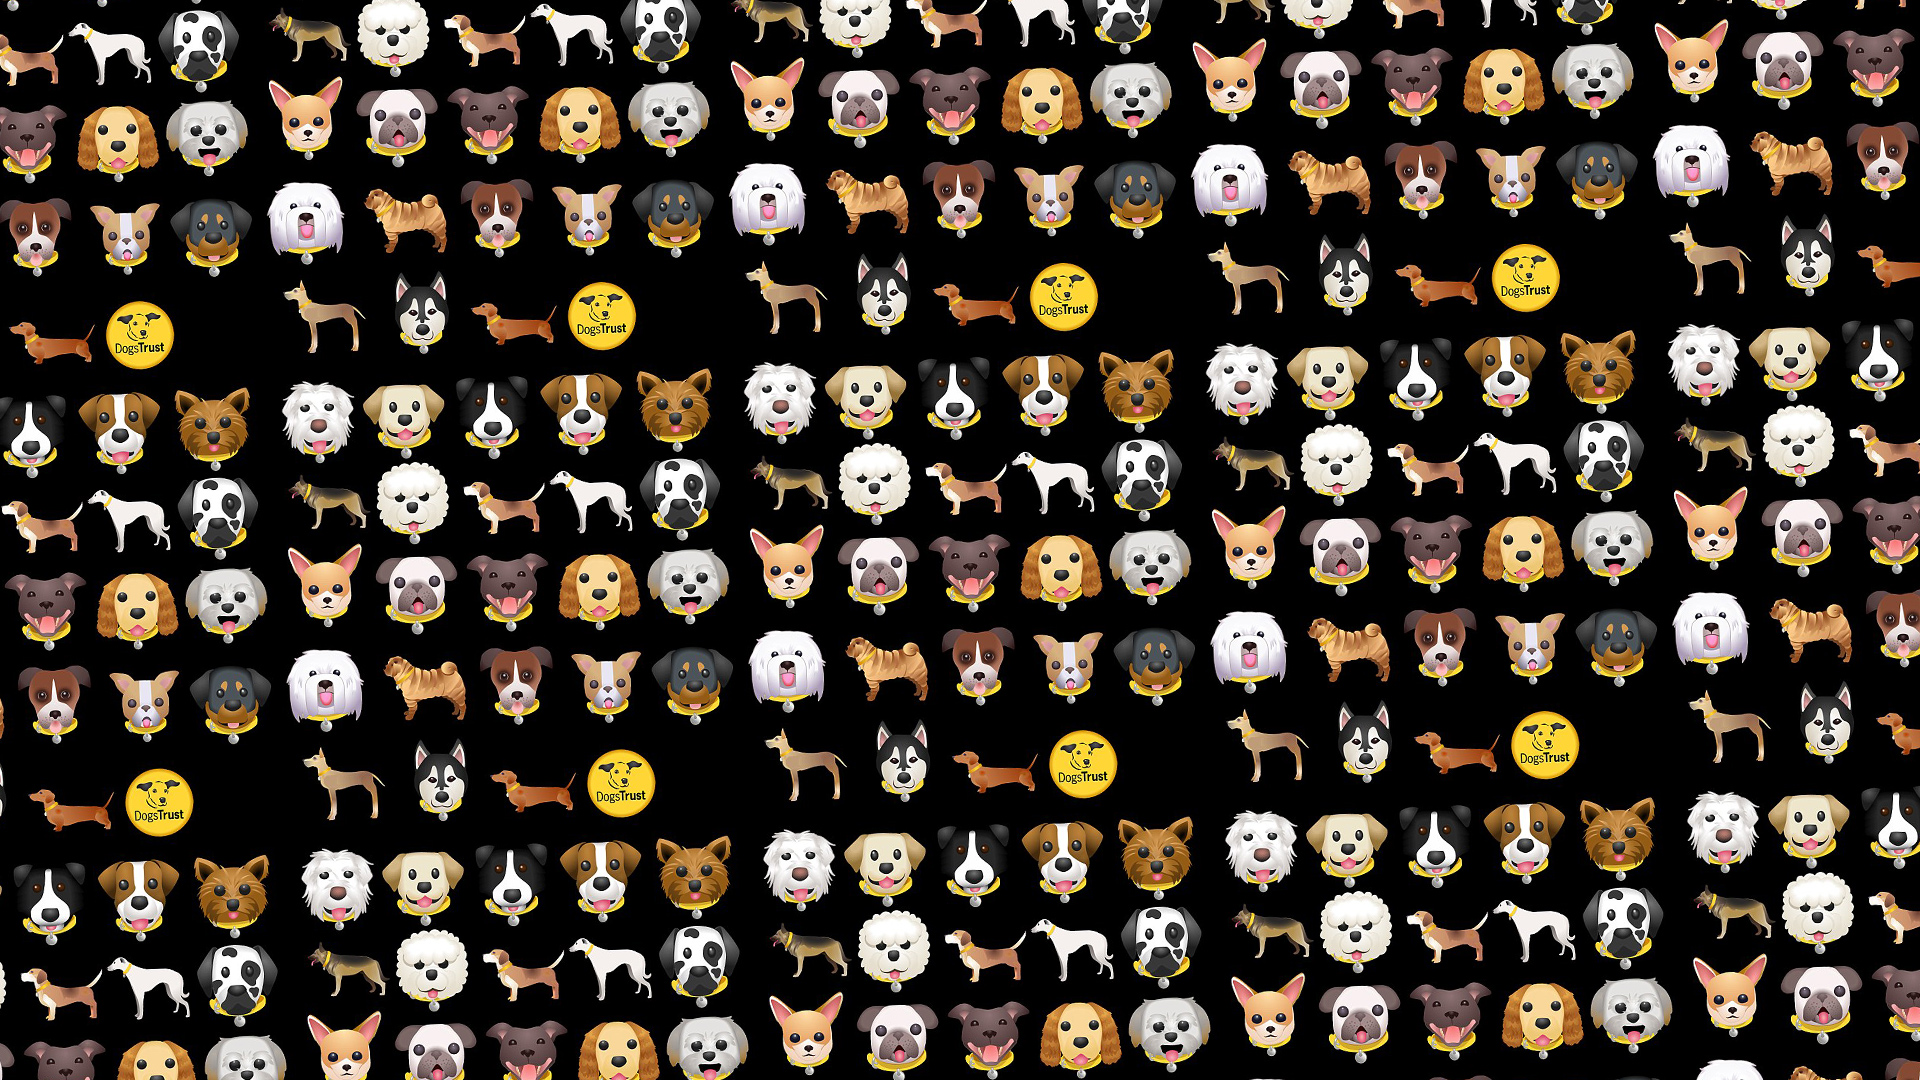 Puppymoji: Let This Dog Emoji Keyboard Diversify Your Texts With 